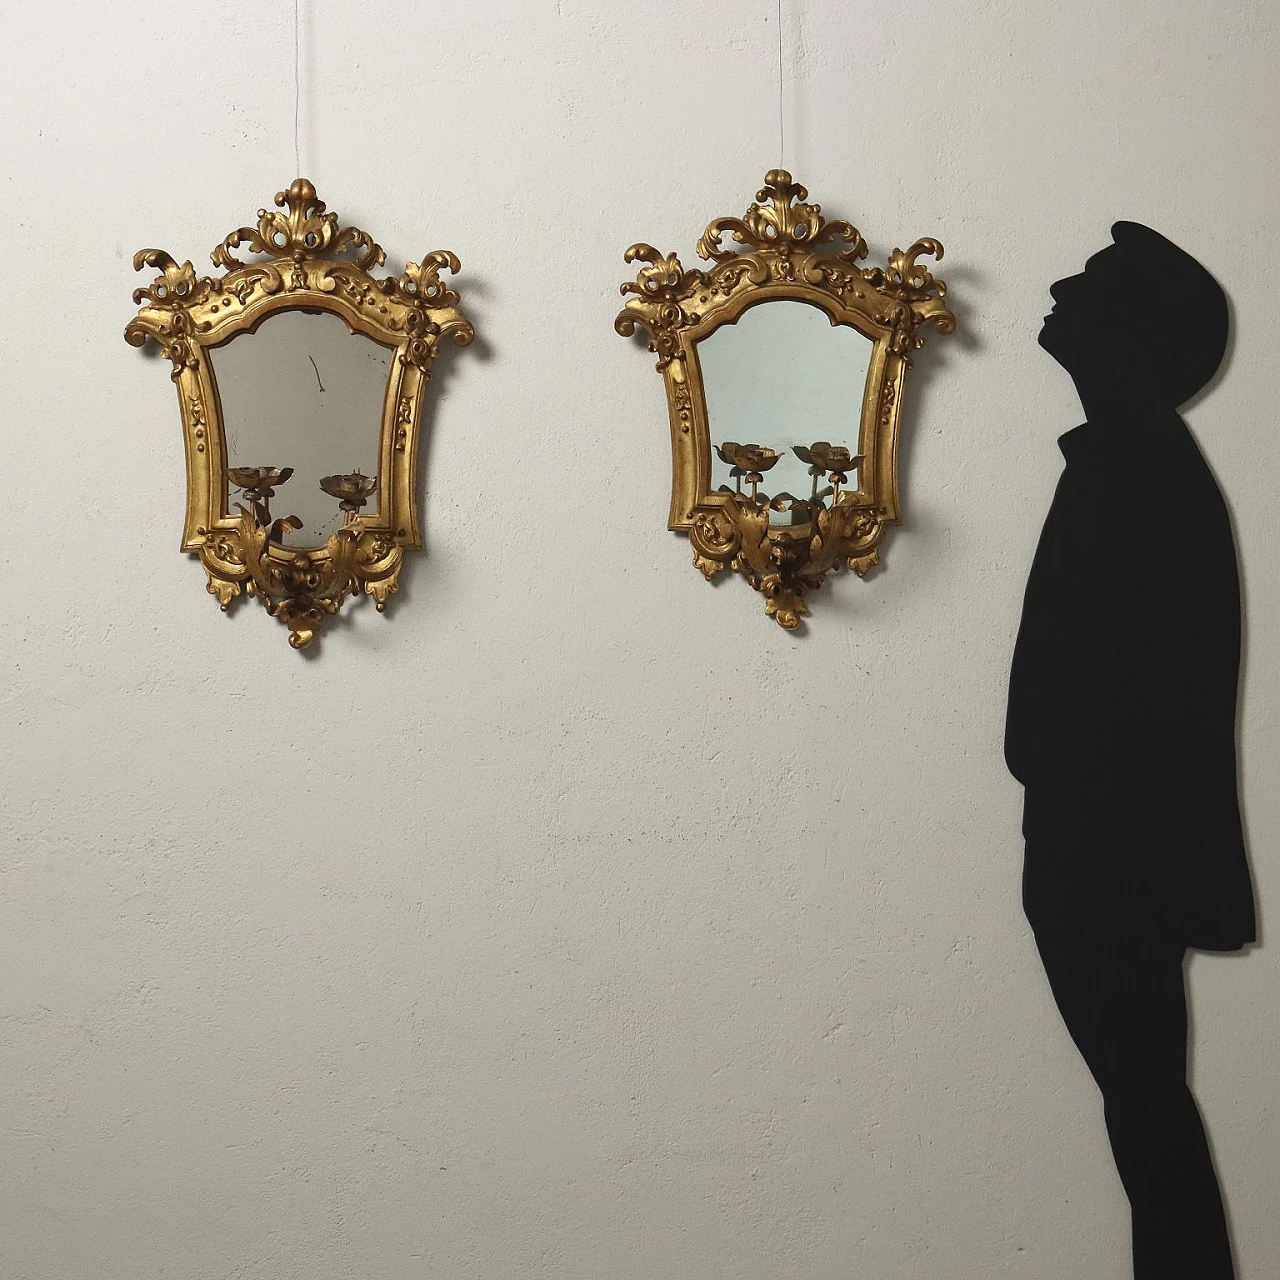 Pair of Baroque embossed sheet metal mirrors with lamp-holding arms, early 18th century 2